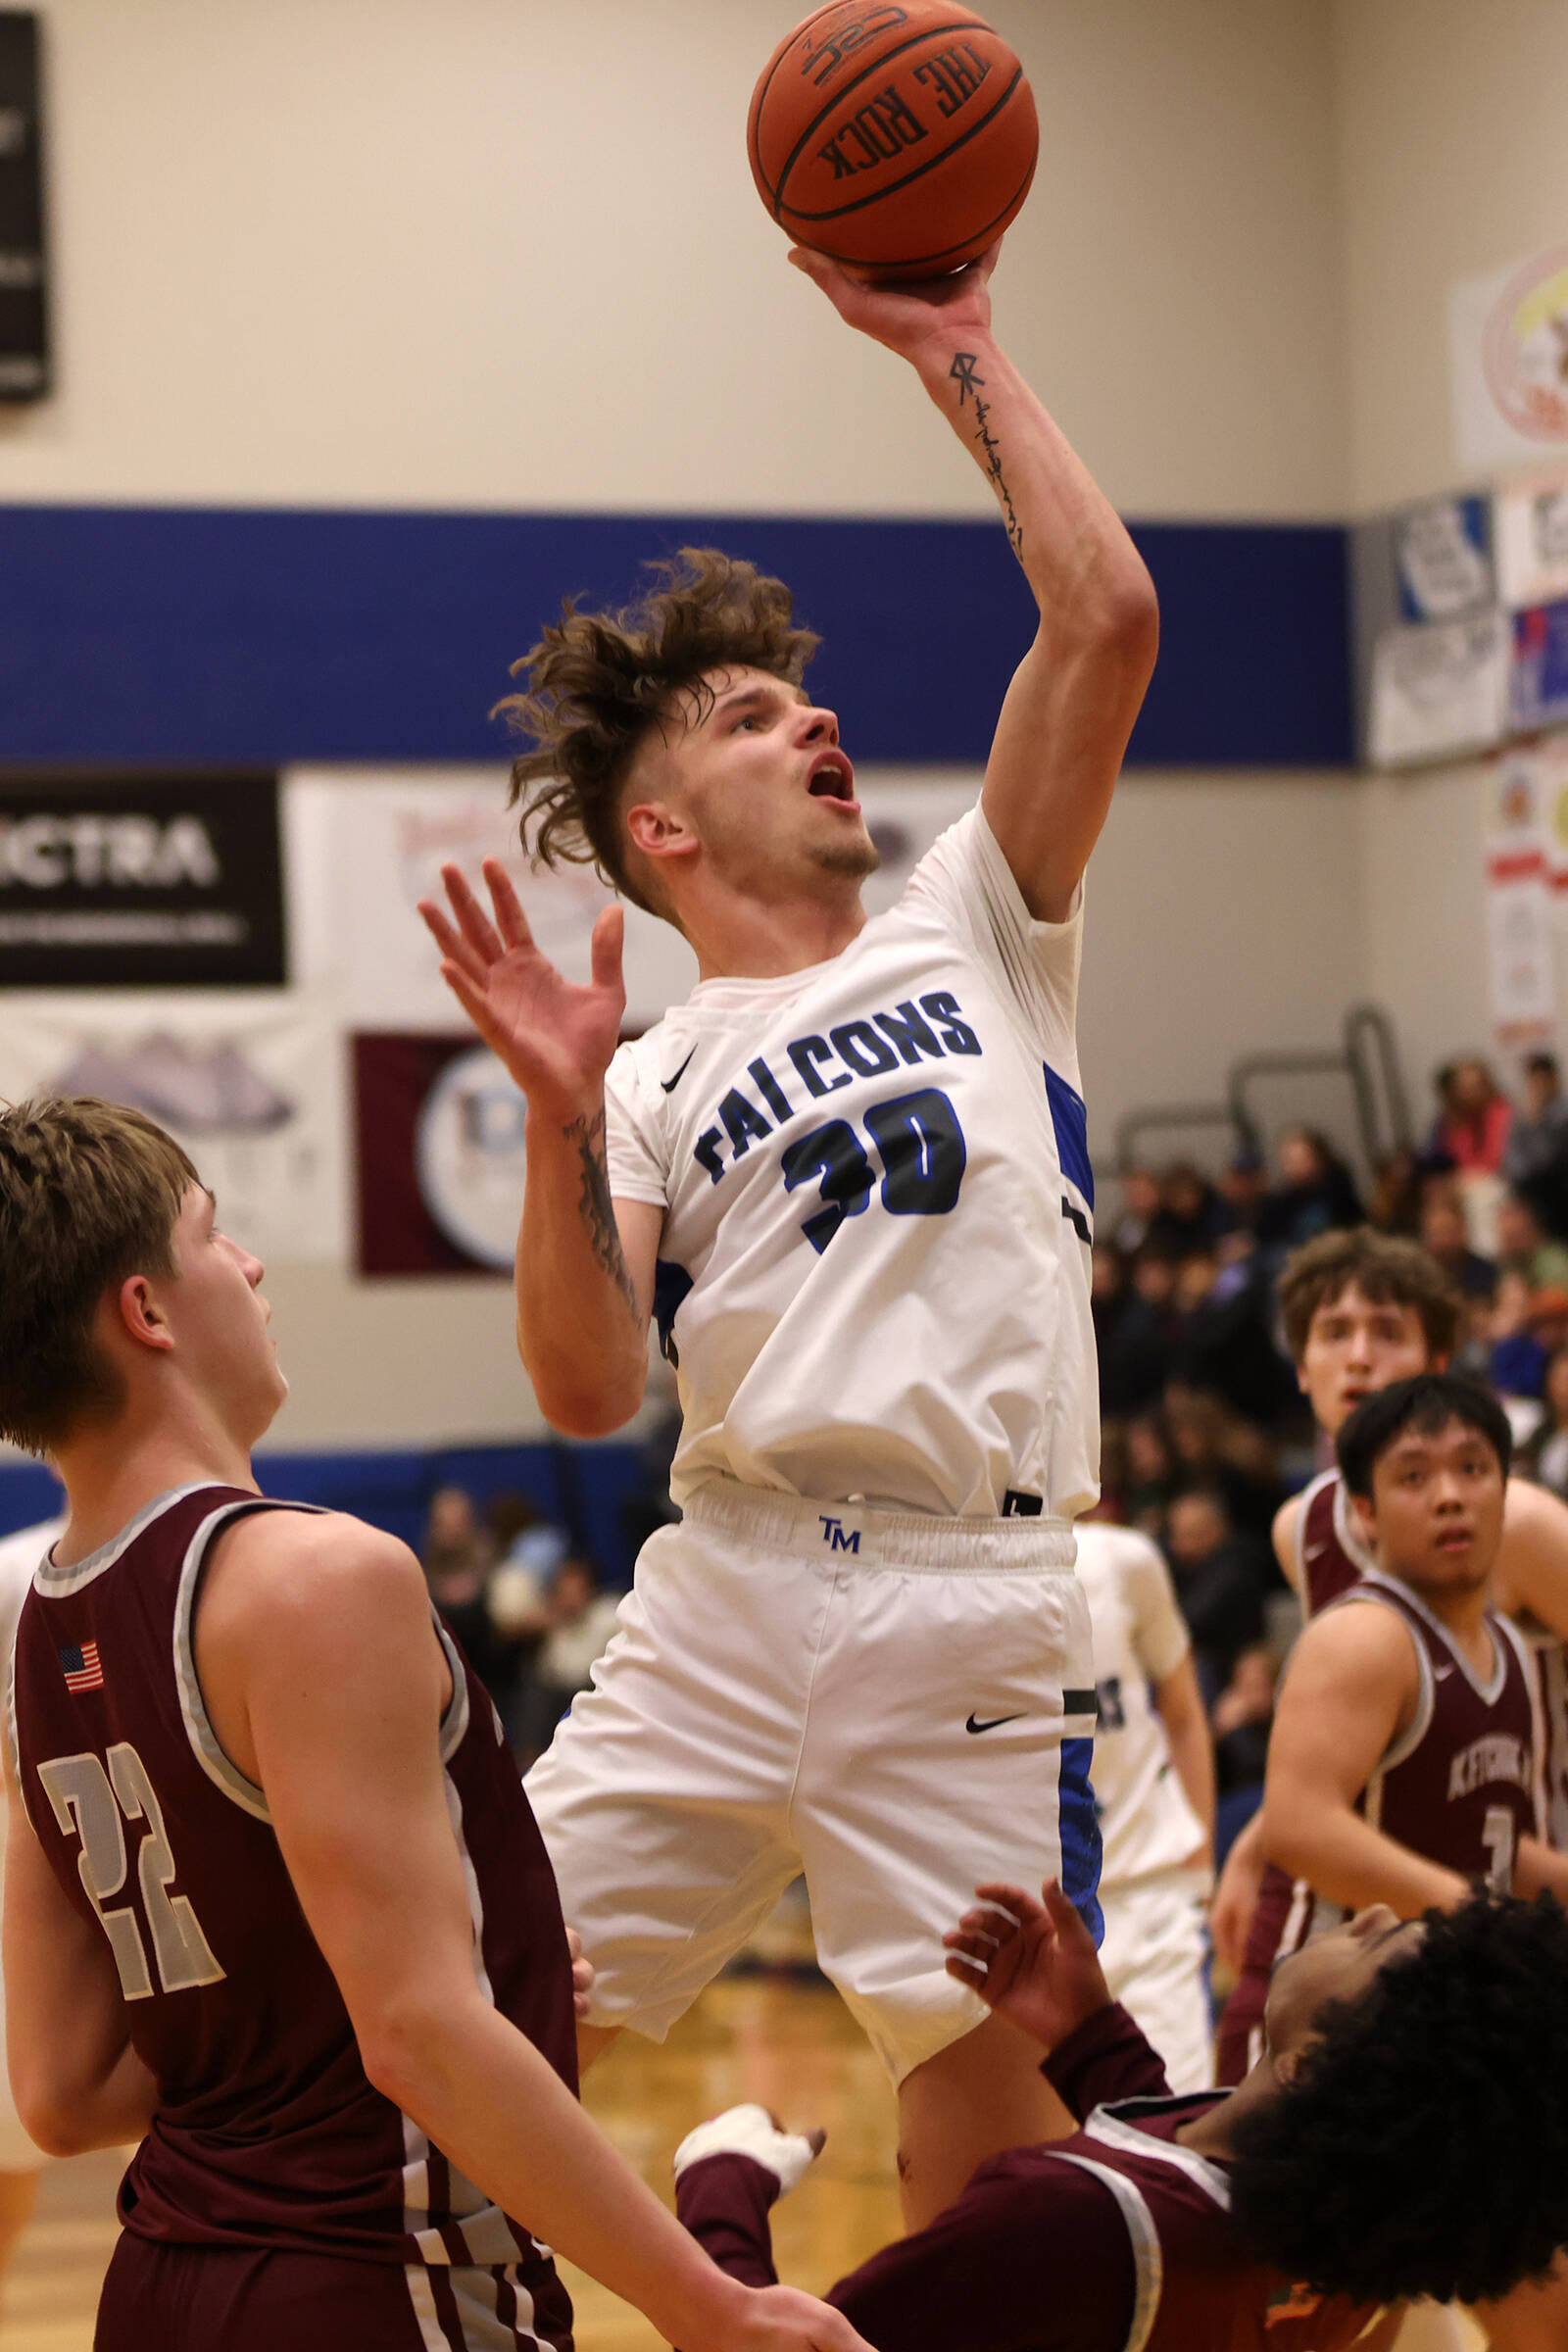 TMHS junior Thomas Baxter (30) takes a tough shot in traffic late in a Friday night 64-59 win against Ketchikan High School. Before the game, Baxter was honored for breaking the 1,000-point mark. He’s the fastest-ever Falcon to do so, and now sits at No. 3 on the school’s all-time scoring list. He finished Friday’s game with 25 points. (Ben Hohenstatt / Juneau Empire)